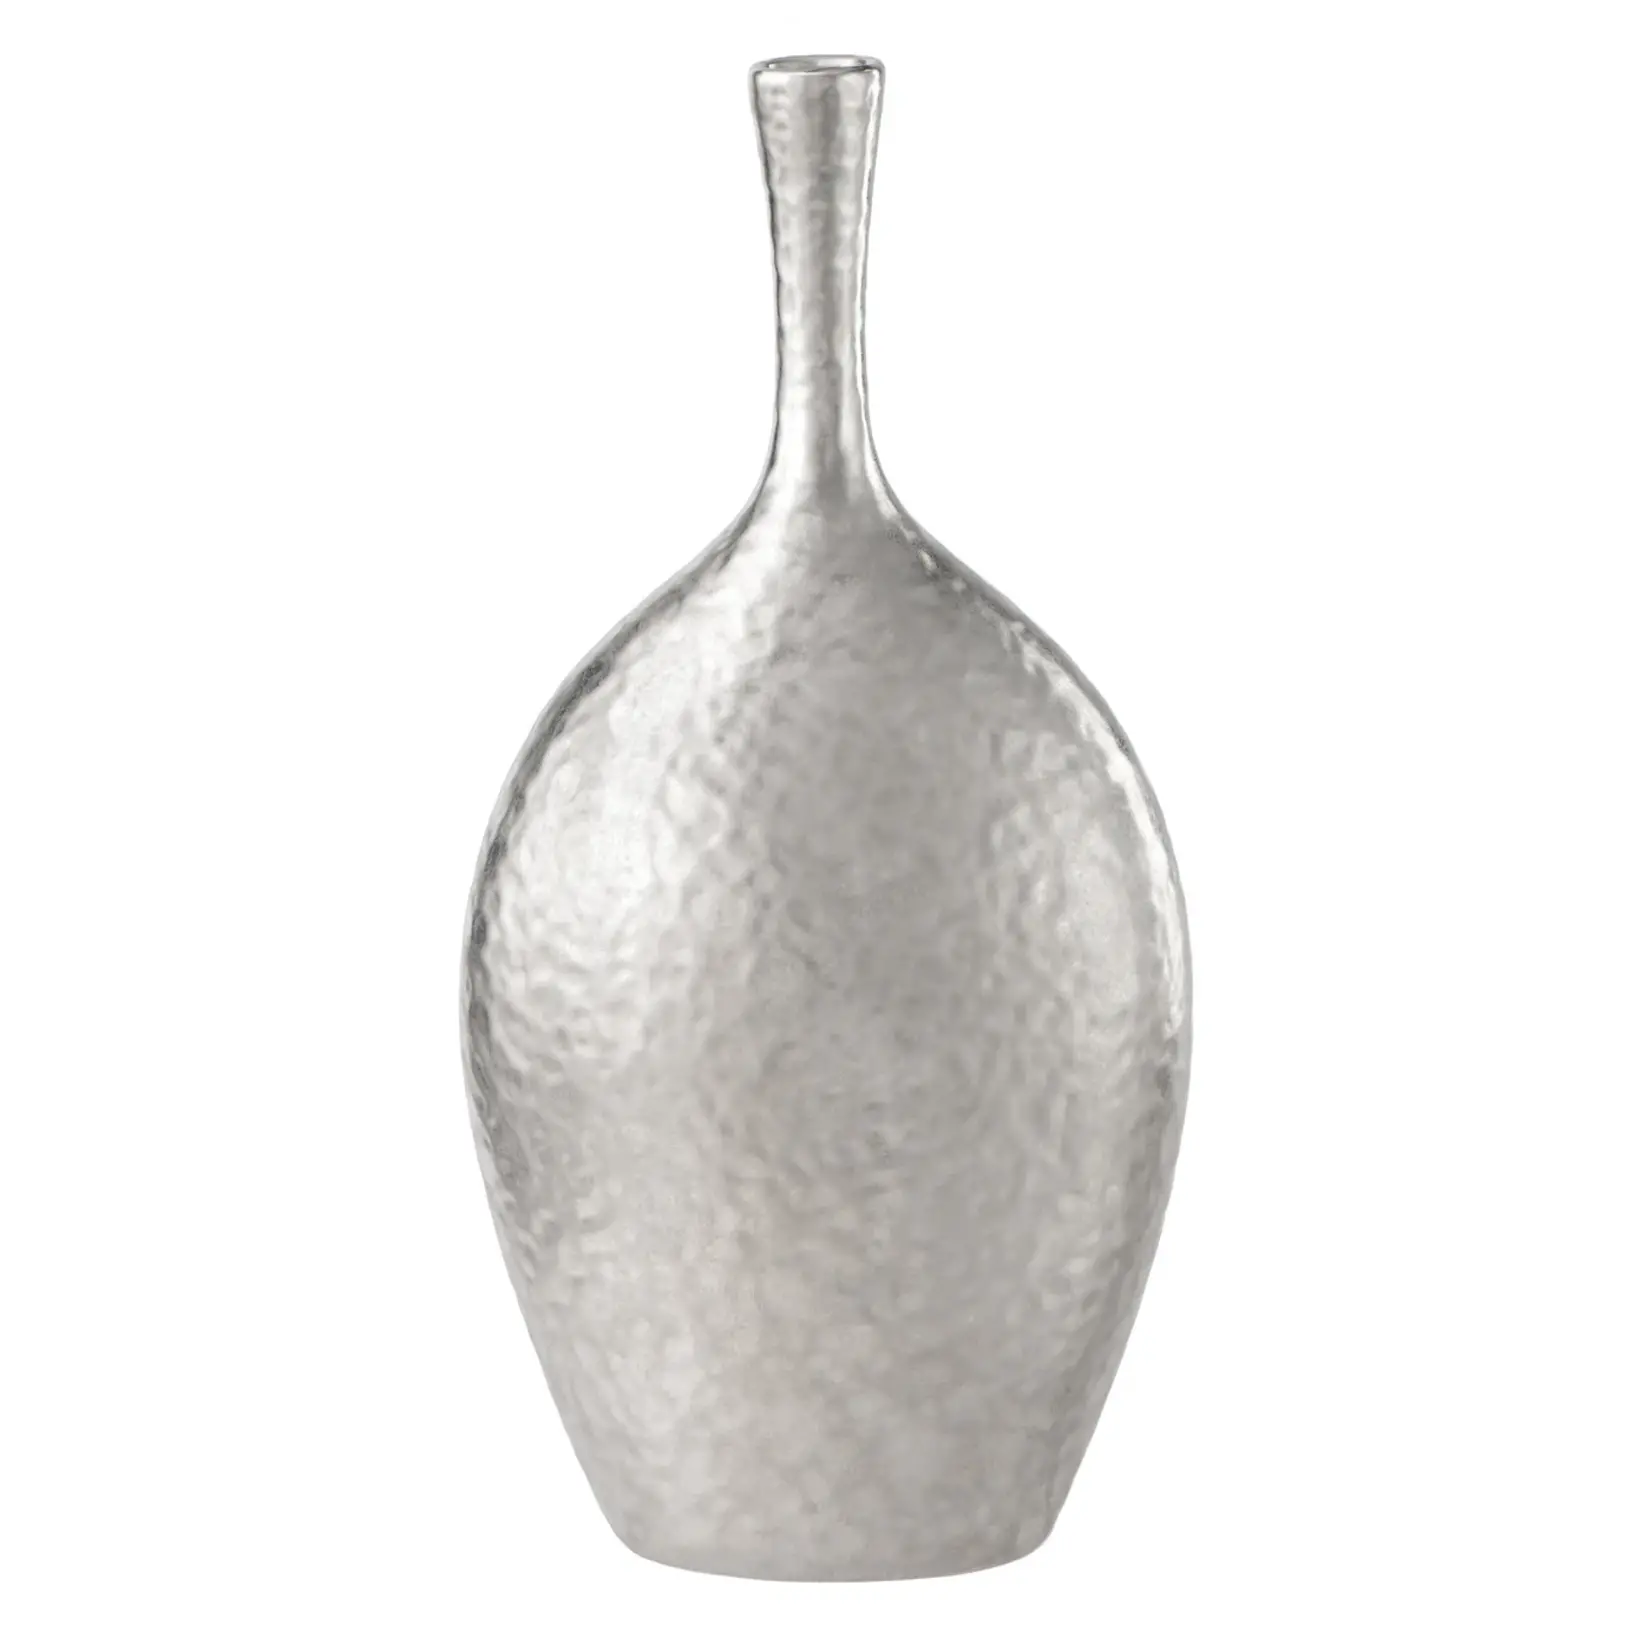 Torre & Tagus Lilo Silver Dimpled Vase - 12.25"